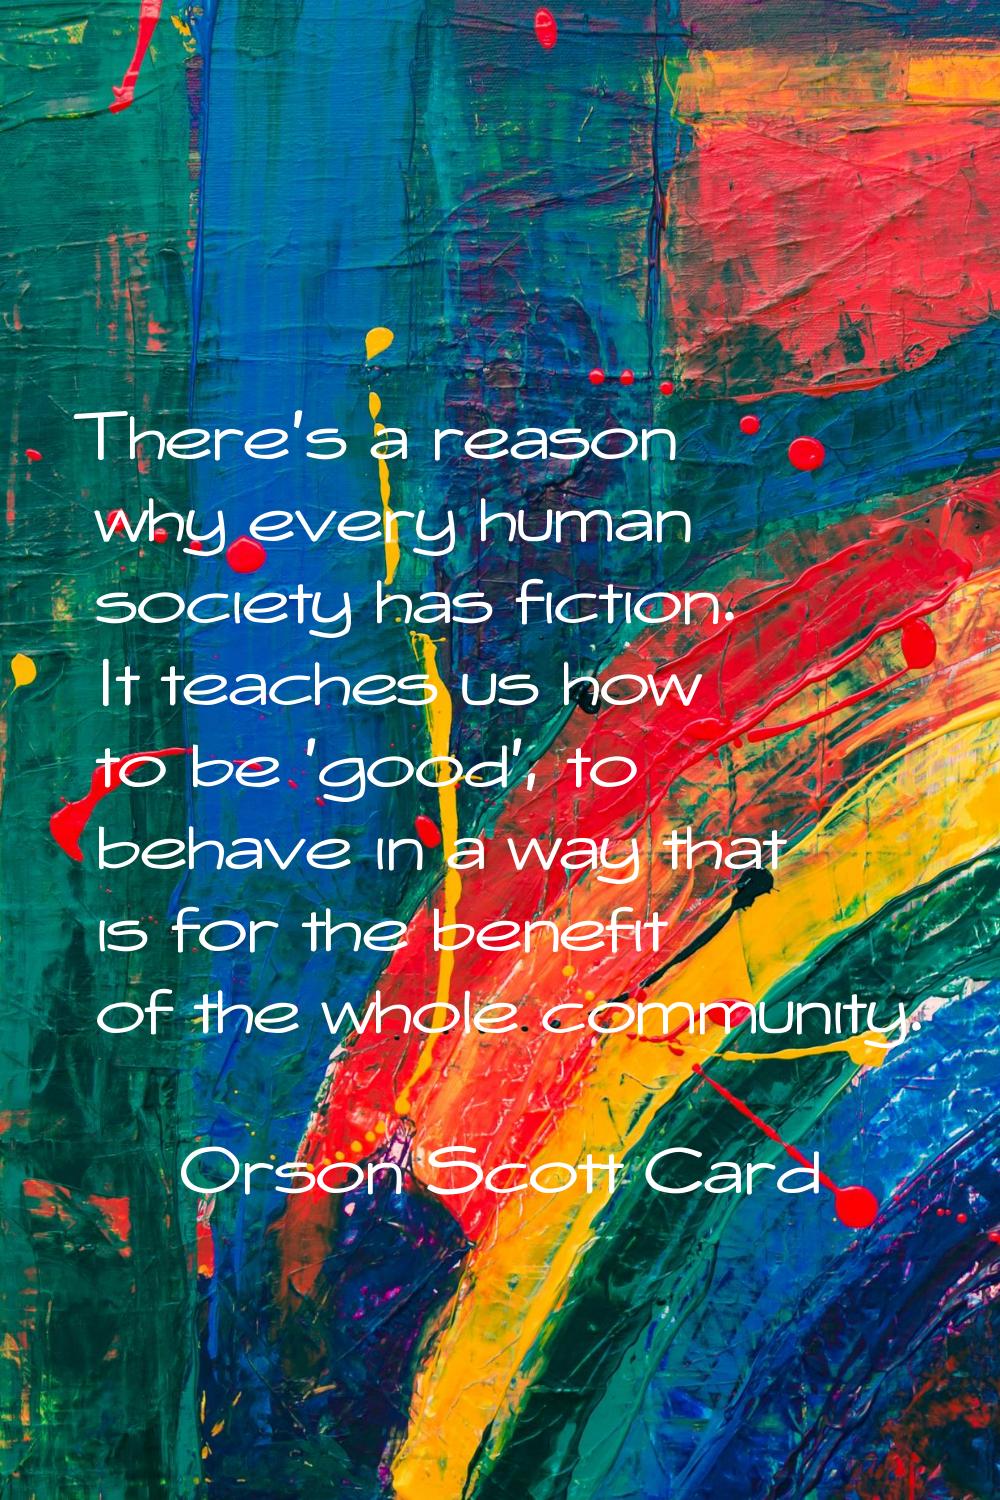 There's a reason why every human society has fiction. It teaches us how to be 'good', to behave in 